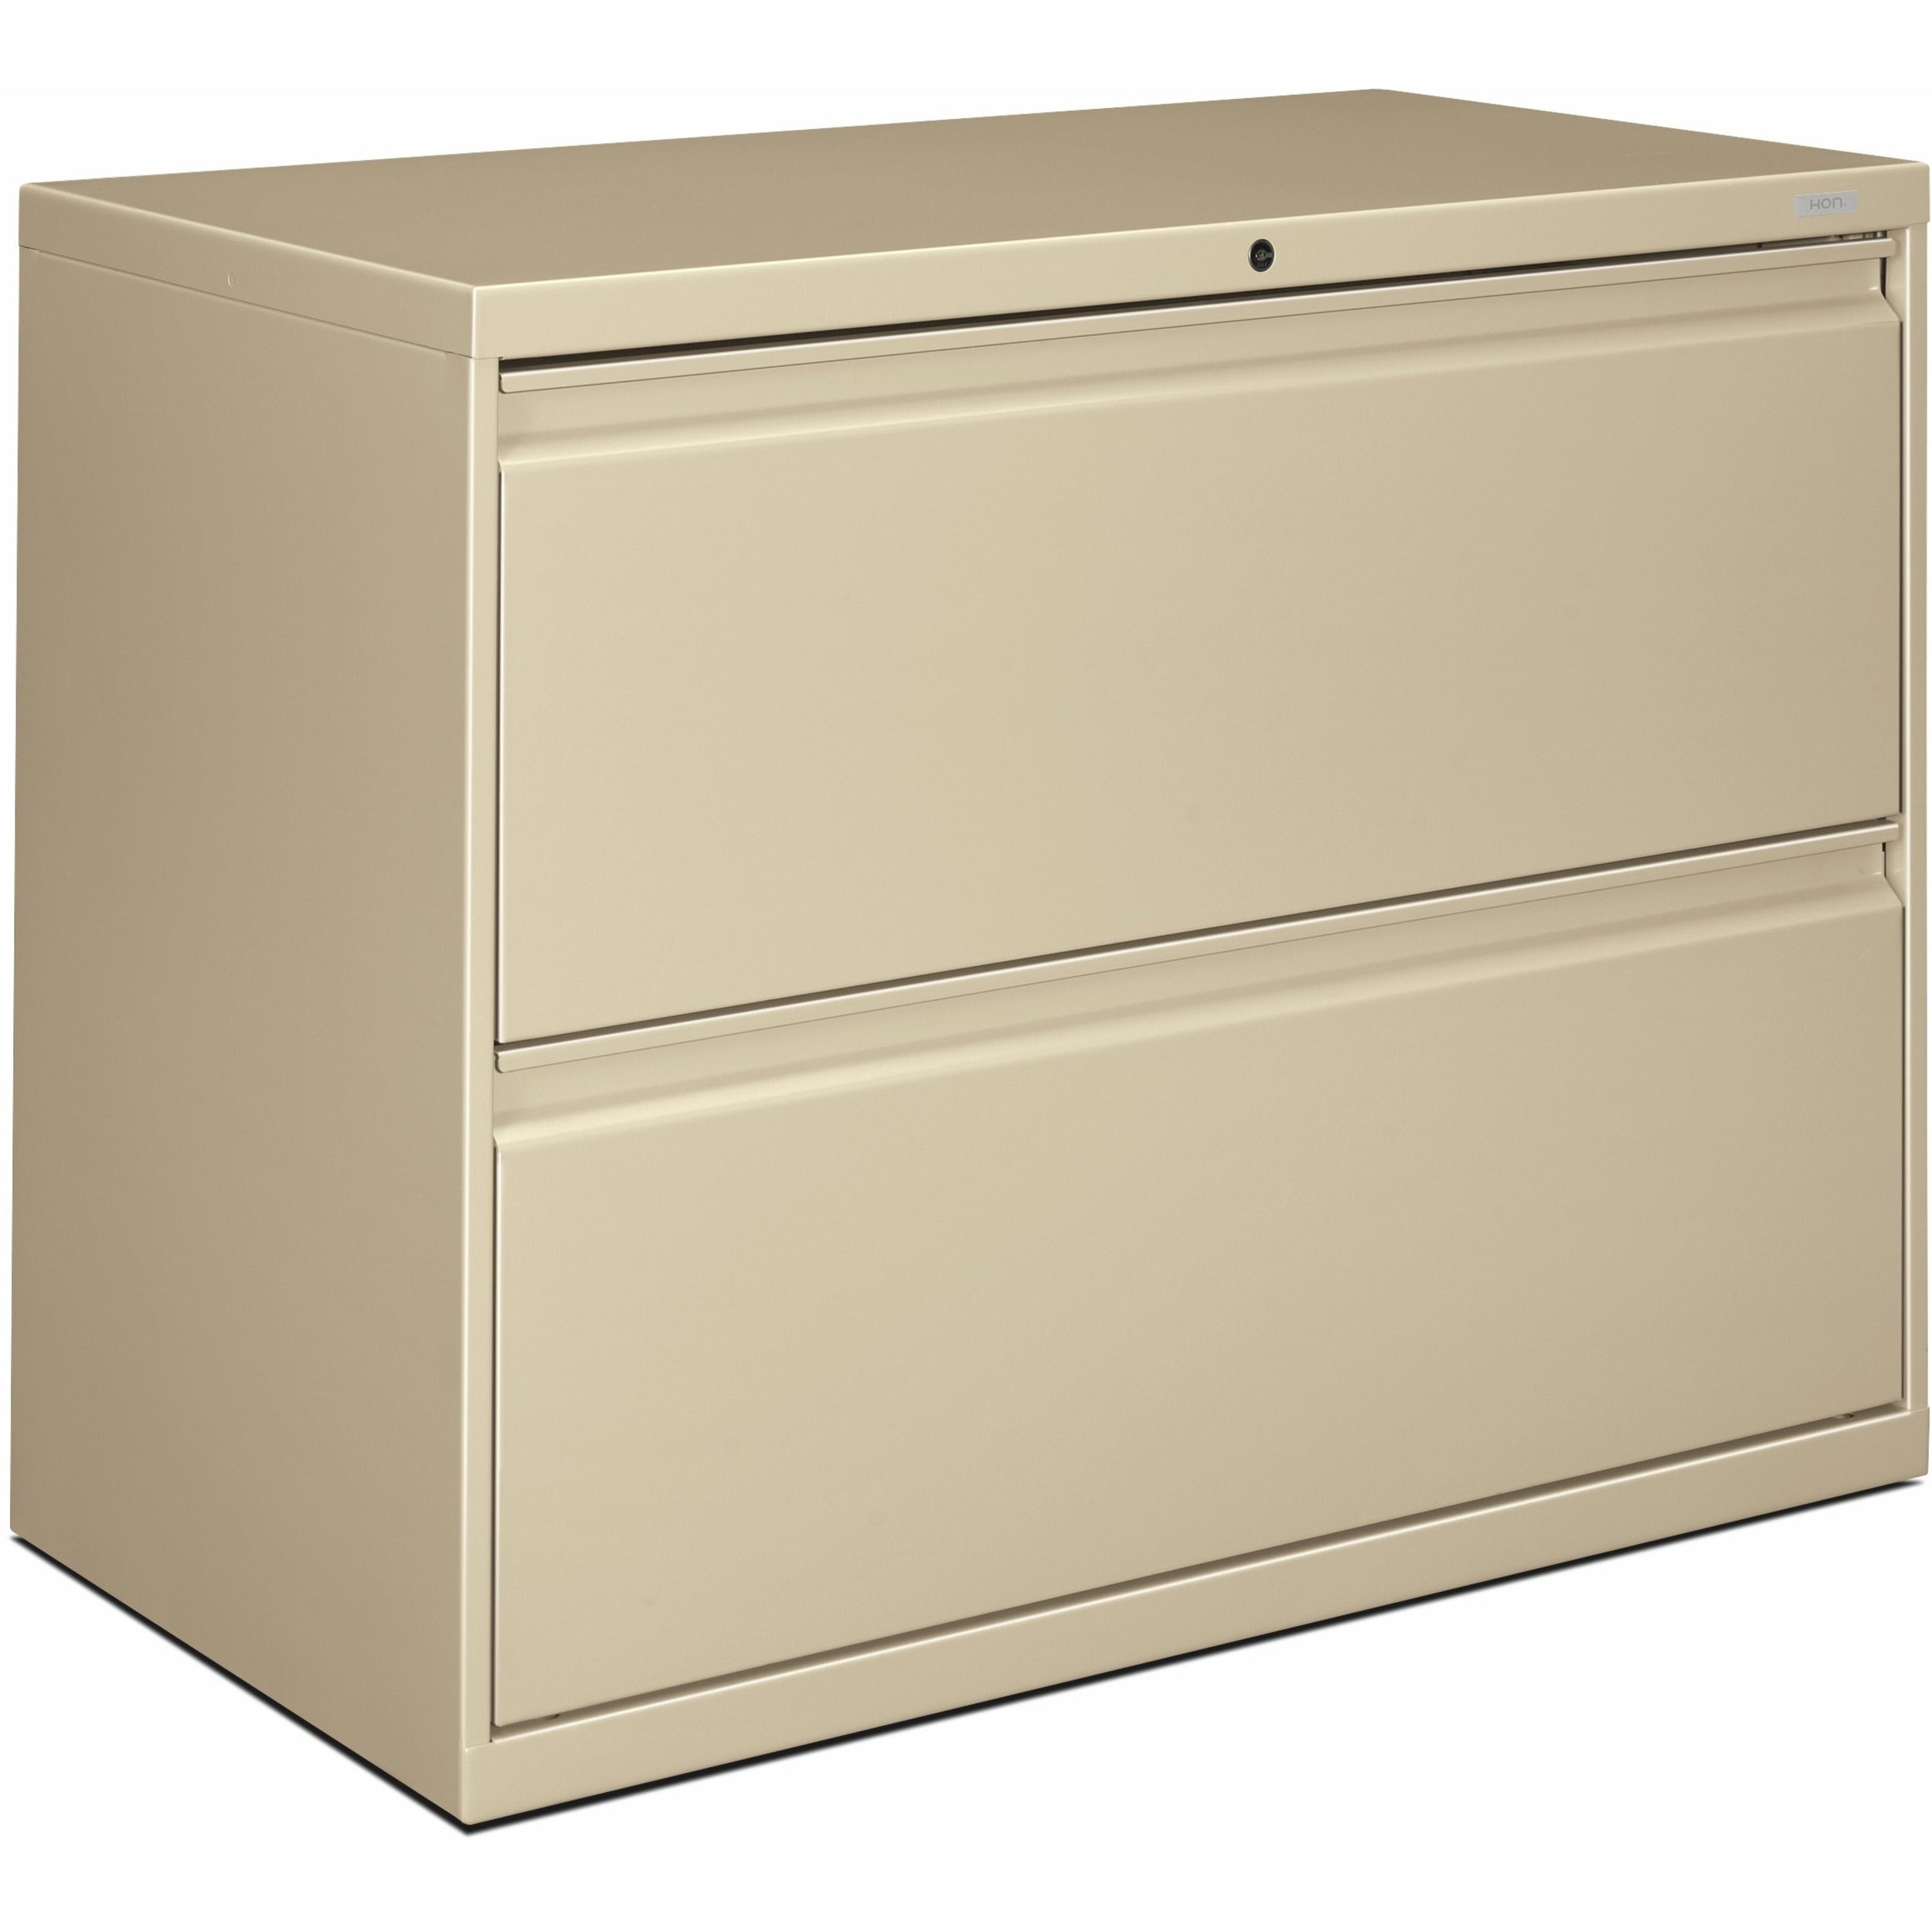 hon-brigade-800-h882-lateral-file-36-x-193284-2-drawers-finish-putty_hon882ll - 1